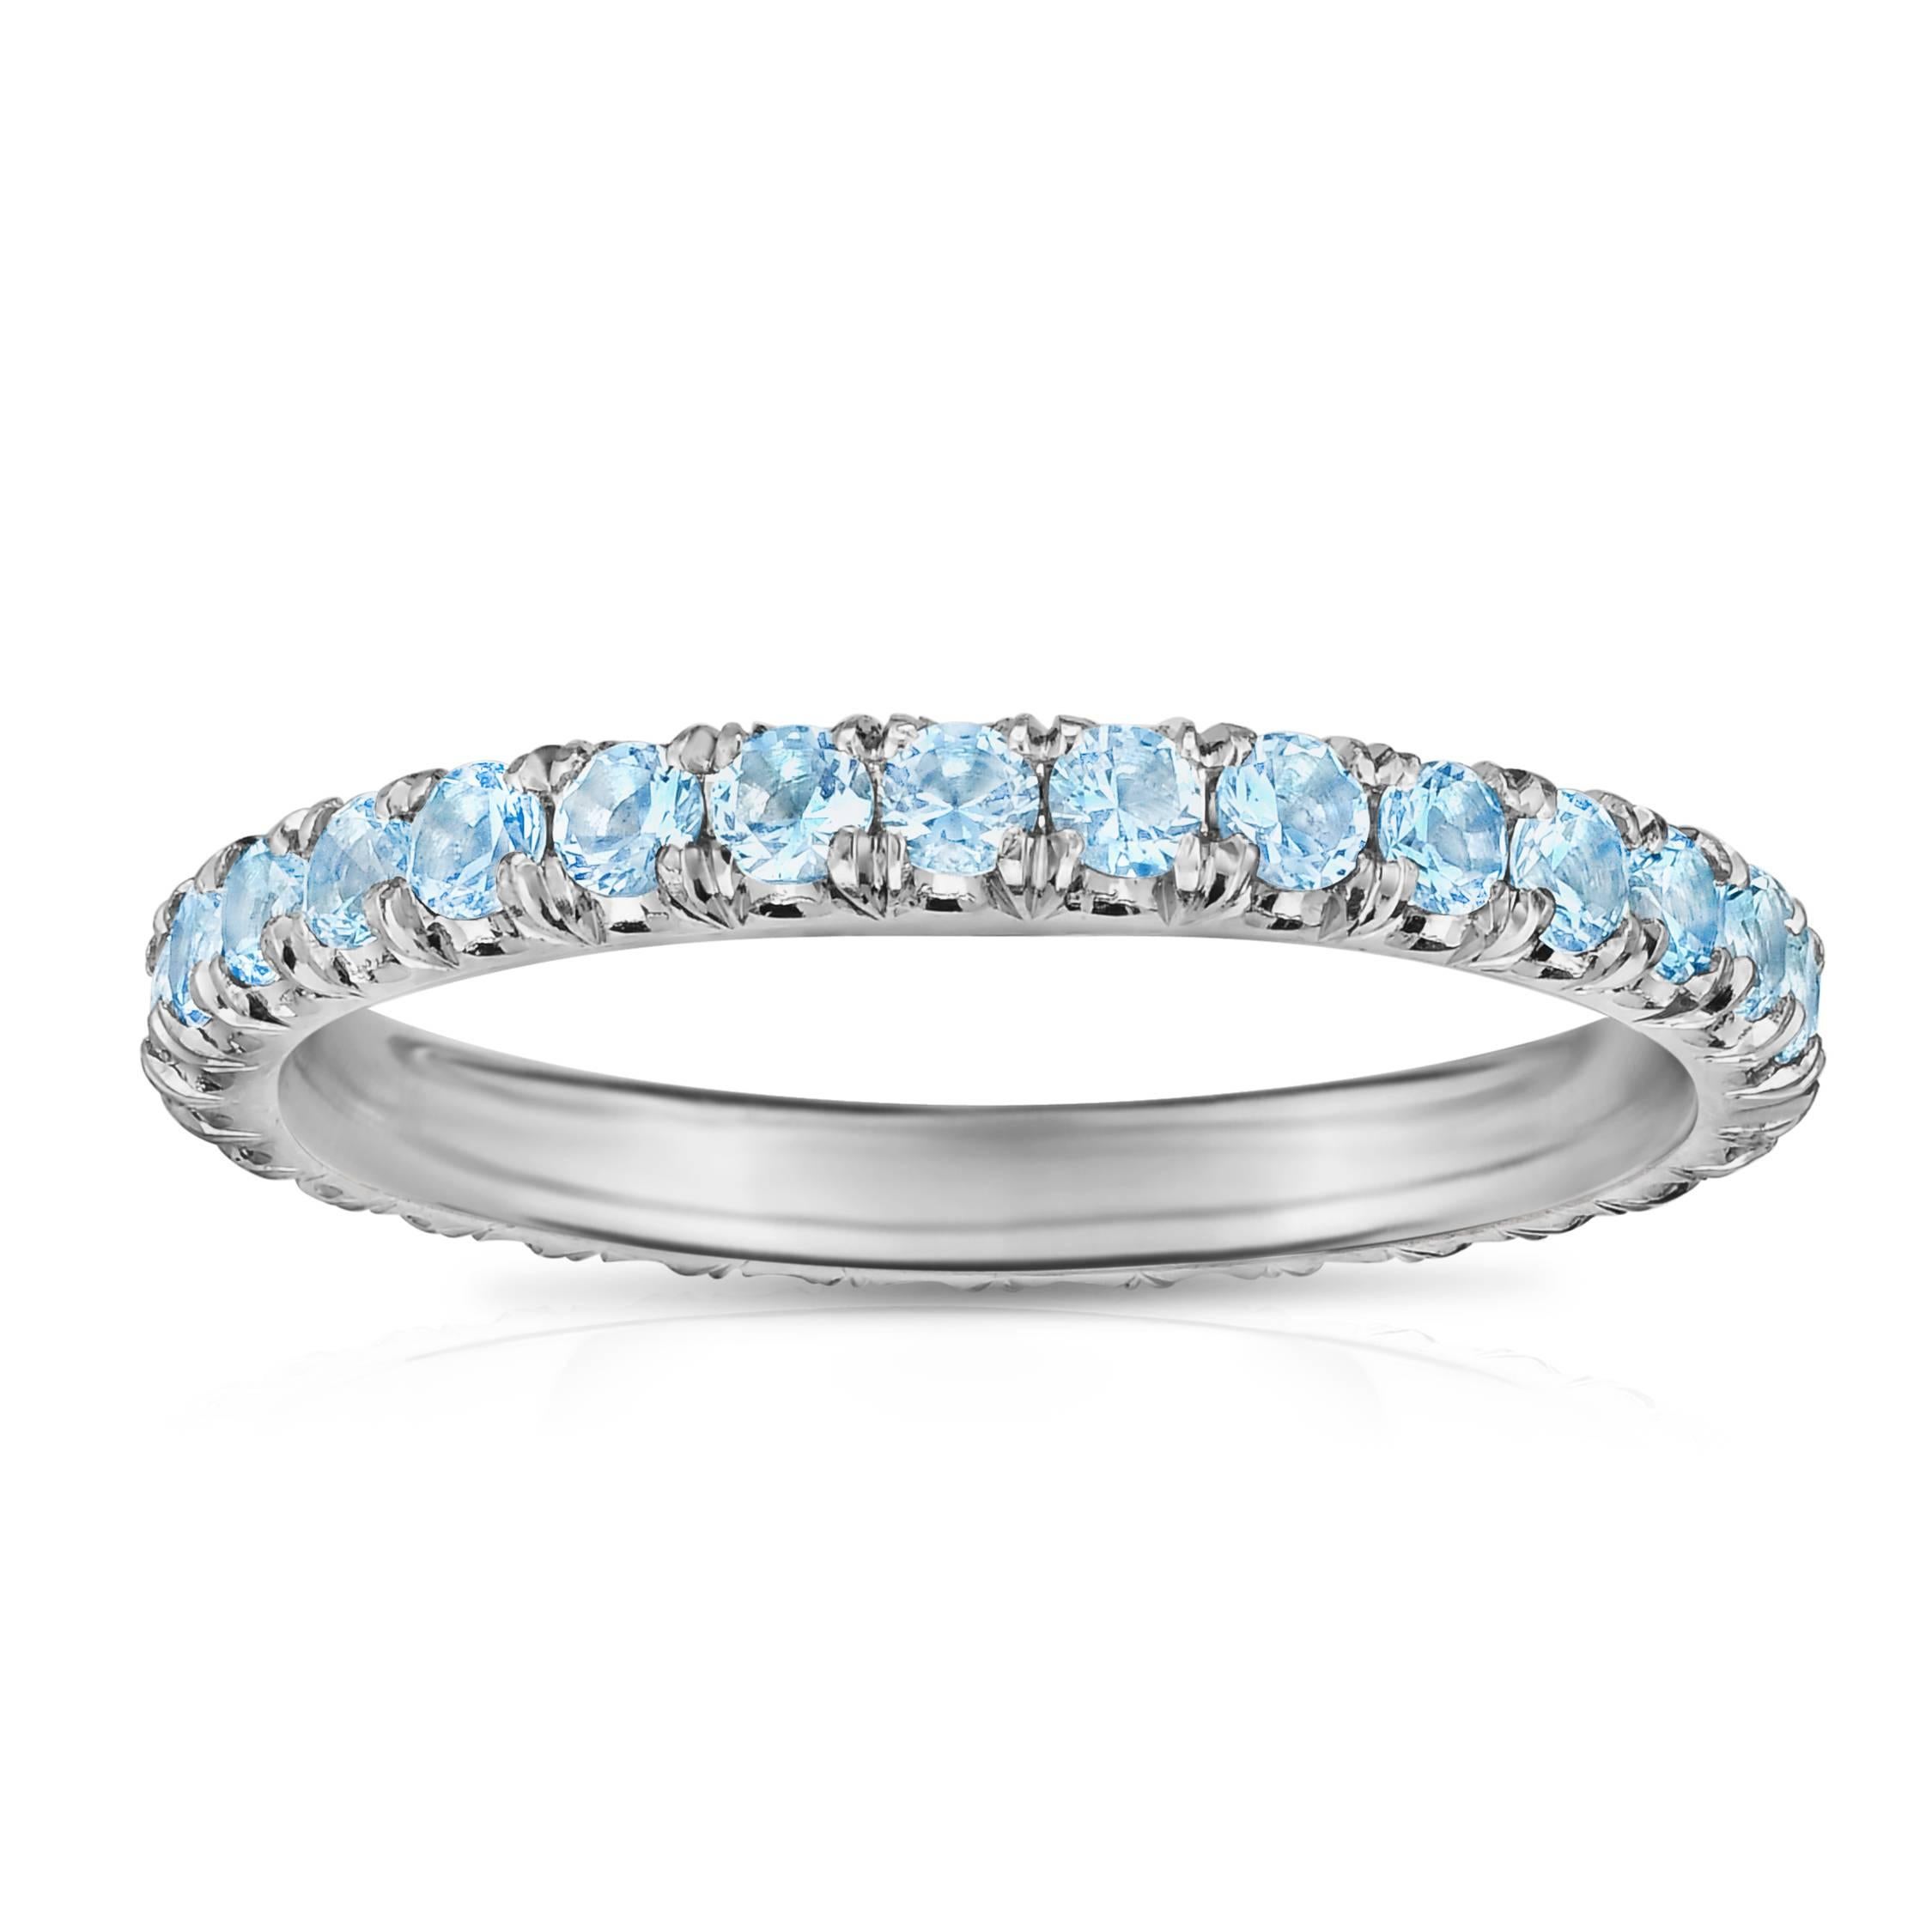 Marisa Perry's three point aquamarine eternity band in platinum makes the perfect wedding ring. Eternity rings are also popular as push presents and anniversary gifts. Aquamarine is the March birthstone making this micro pave Aquamarine eternity